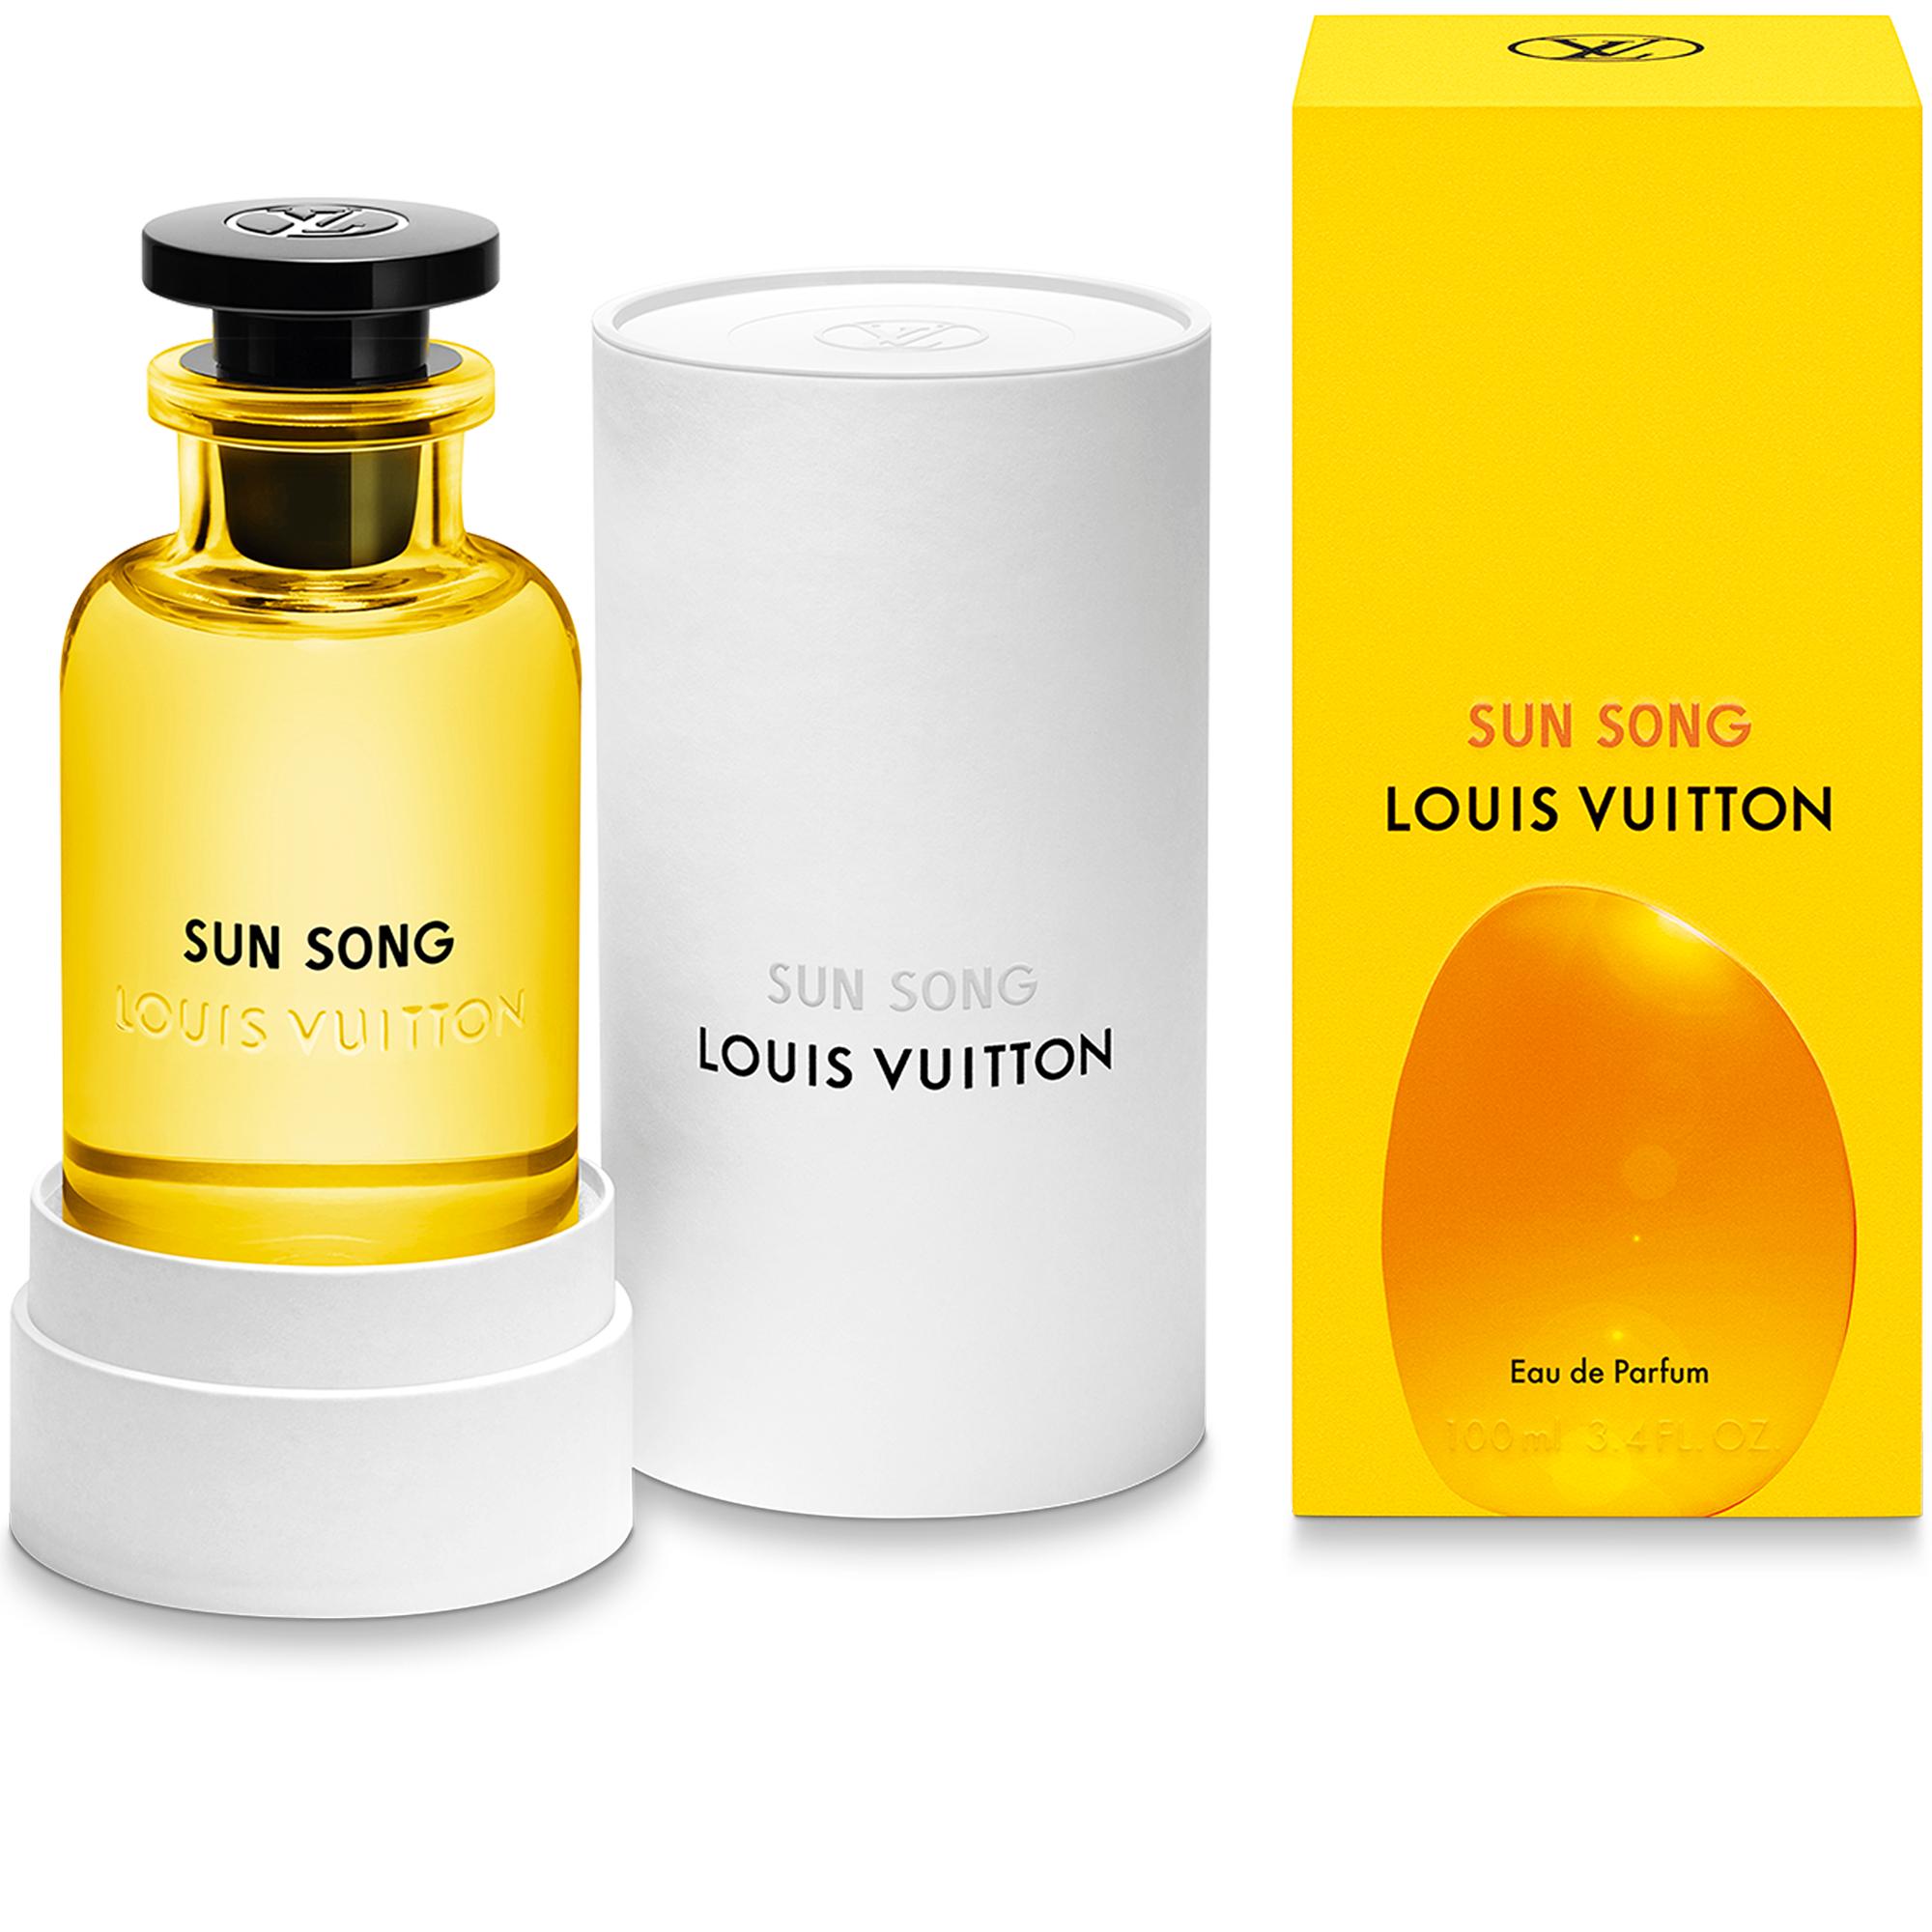 New Louis Vuitton fragrance is Pur Oud